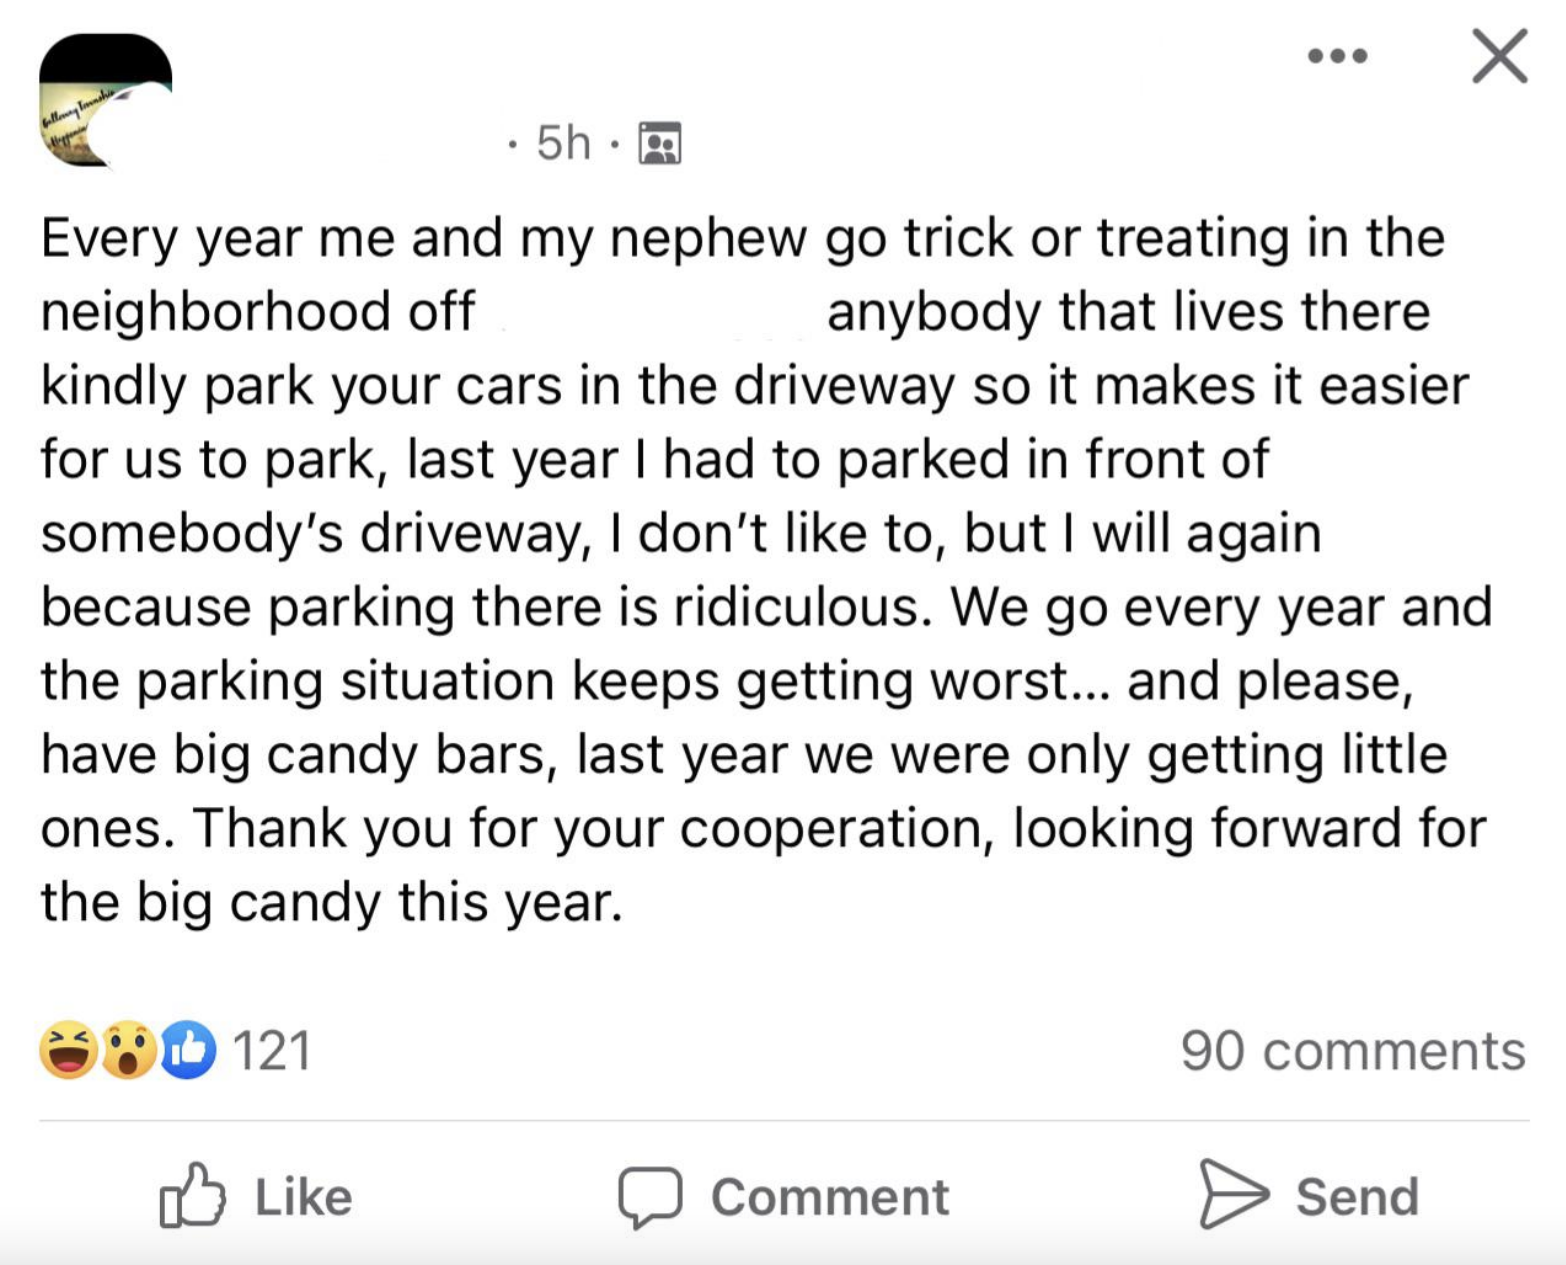 &quot;Thank you for your cooperation, looking forward to big candy this year.&quot;